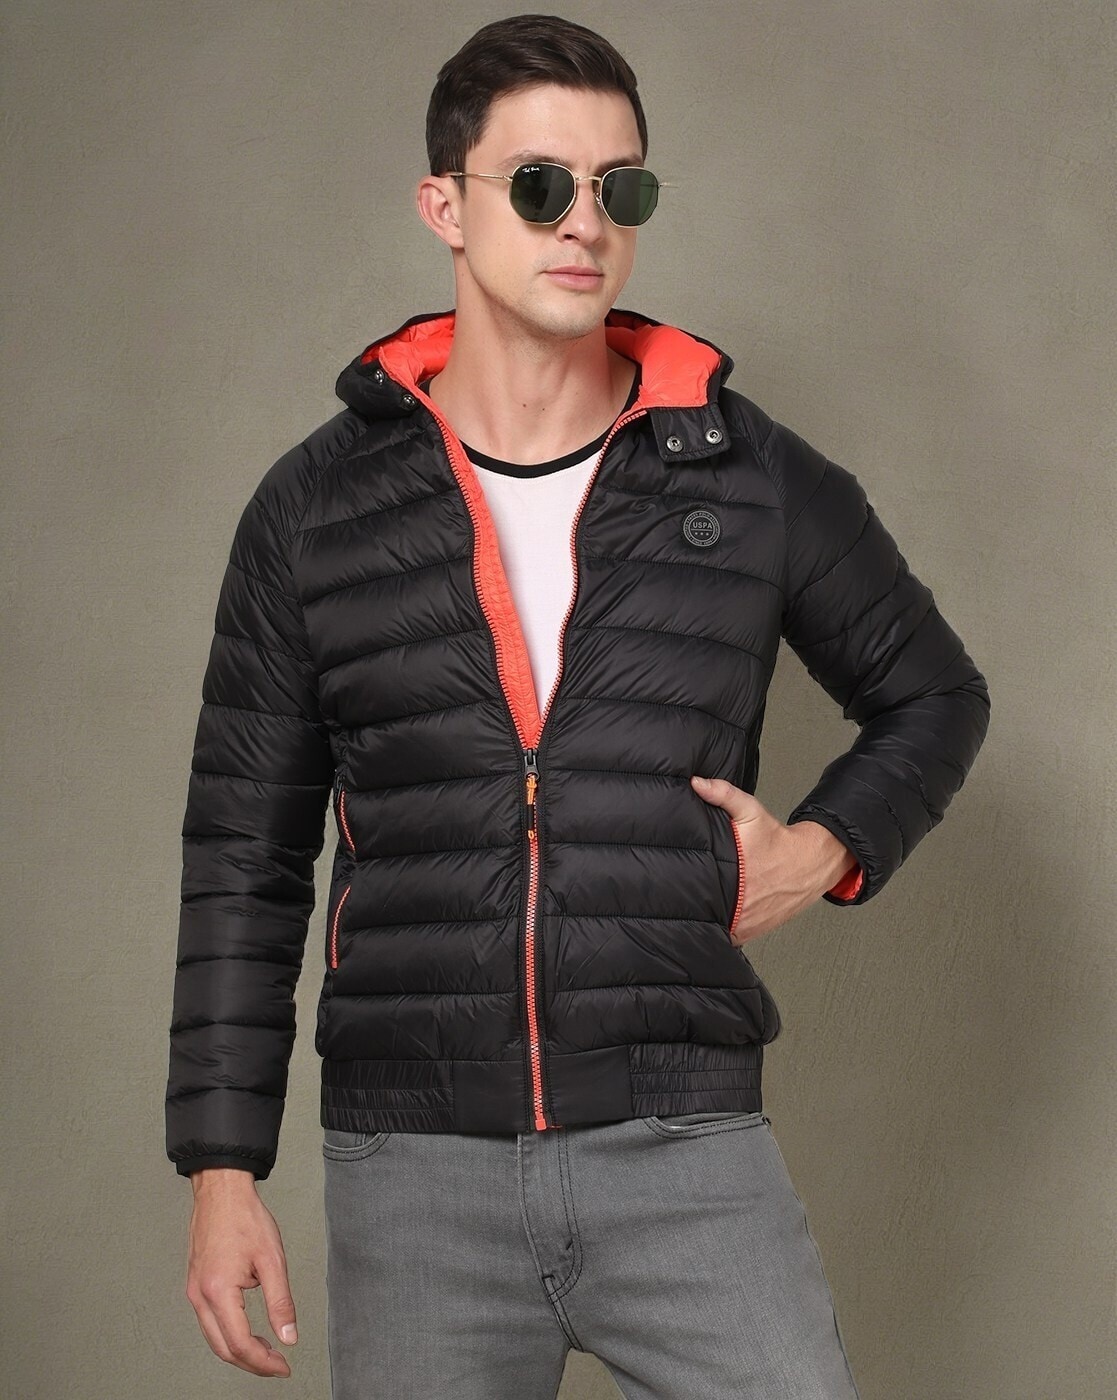 U.S POLO ASSN JACKET, Men's Fashion, Coats, Jackets and Outerwear on  Carousell